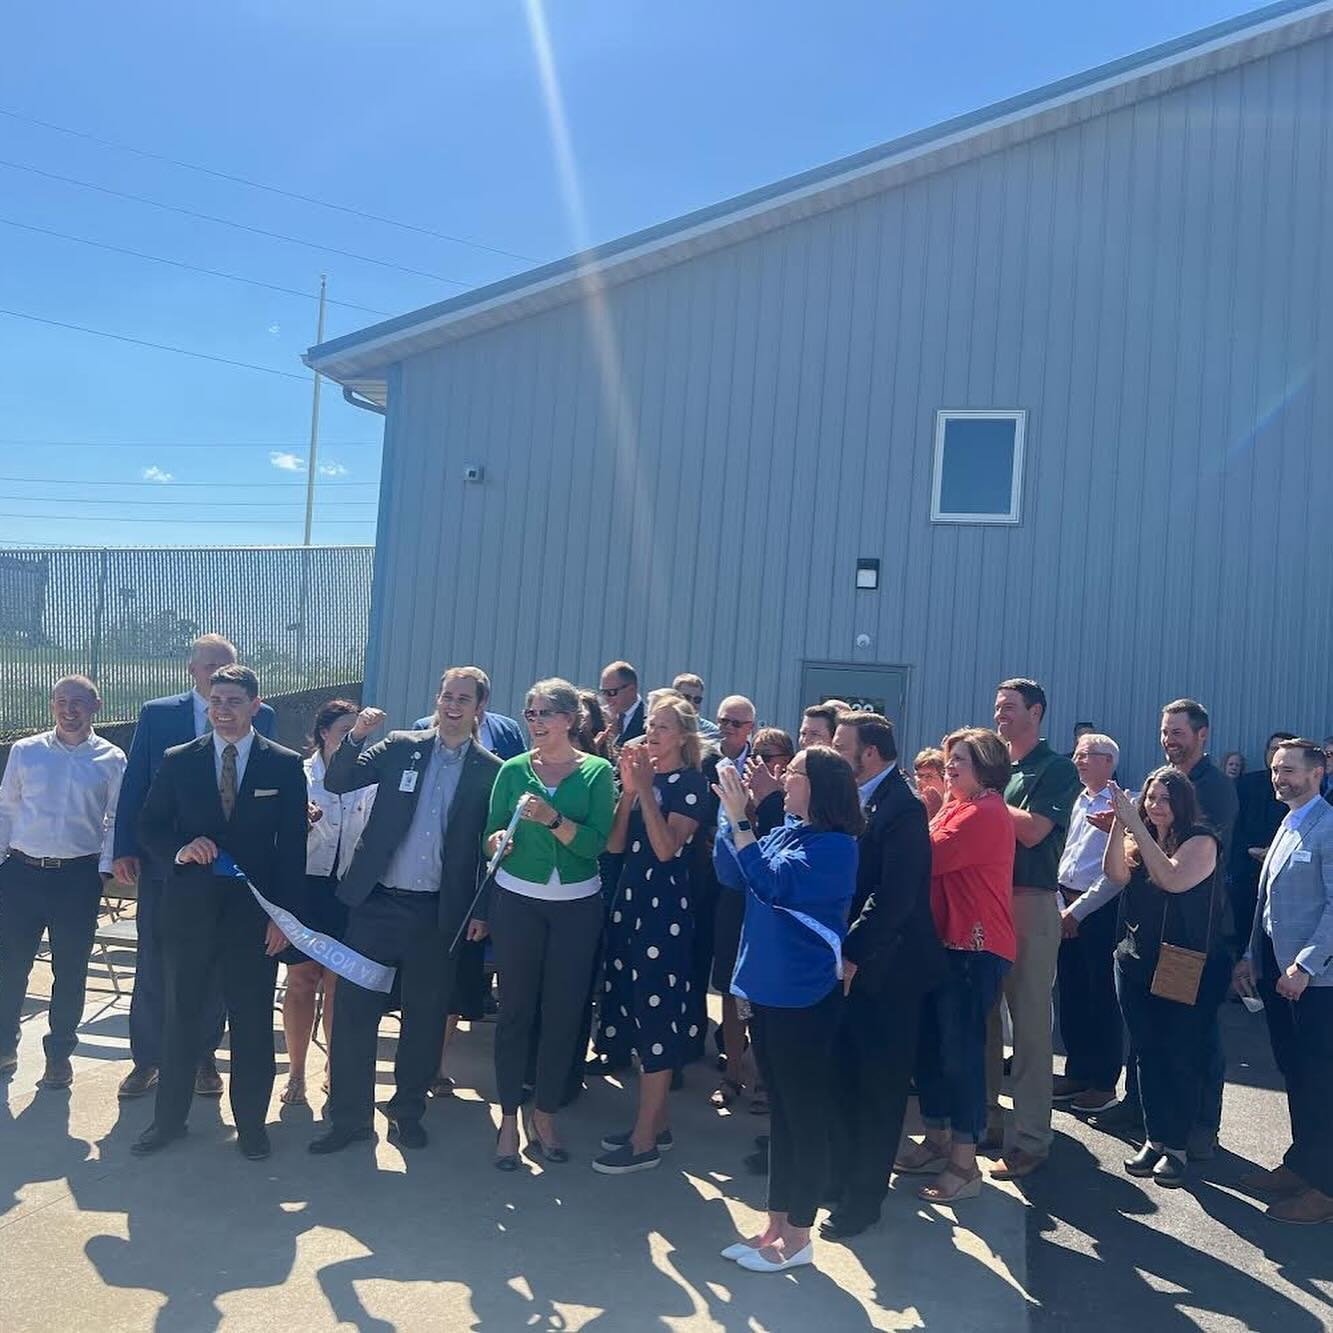 Congratulations to our friends at Life&rsquo;s River in Washington, MO who had their open house and ribbon cutting on April 30.  Like Bridge of Hope, Life&rsquo;s River partners with Catholic Charities St. Louis to support unhoused families in achiev